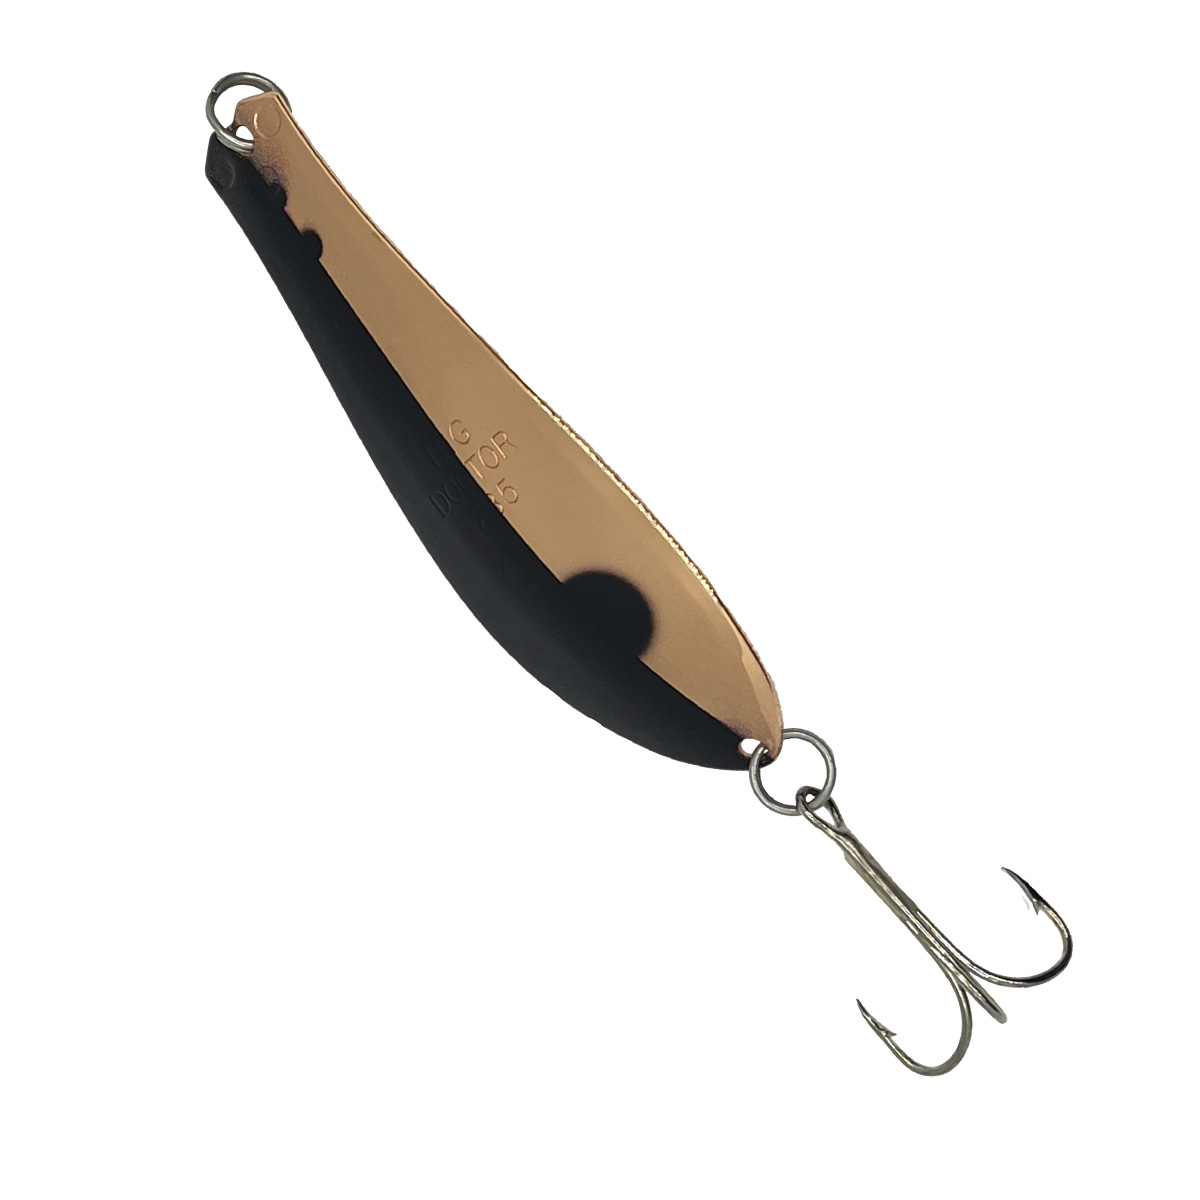 Doctor Spoon in (465) Copper Surprise - Yellow Bird Fishing Products